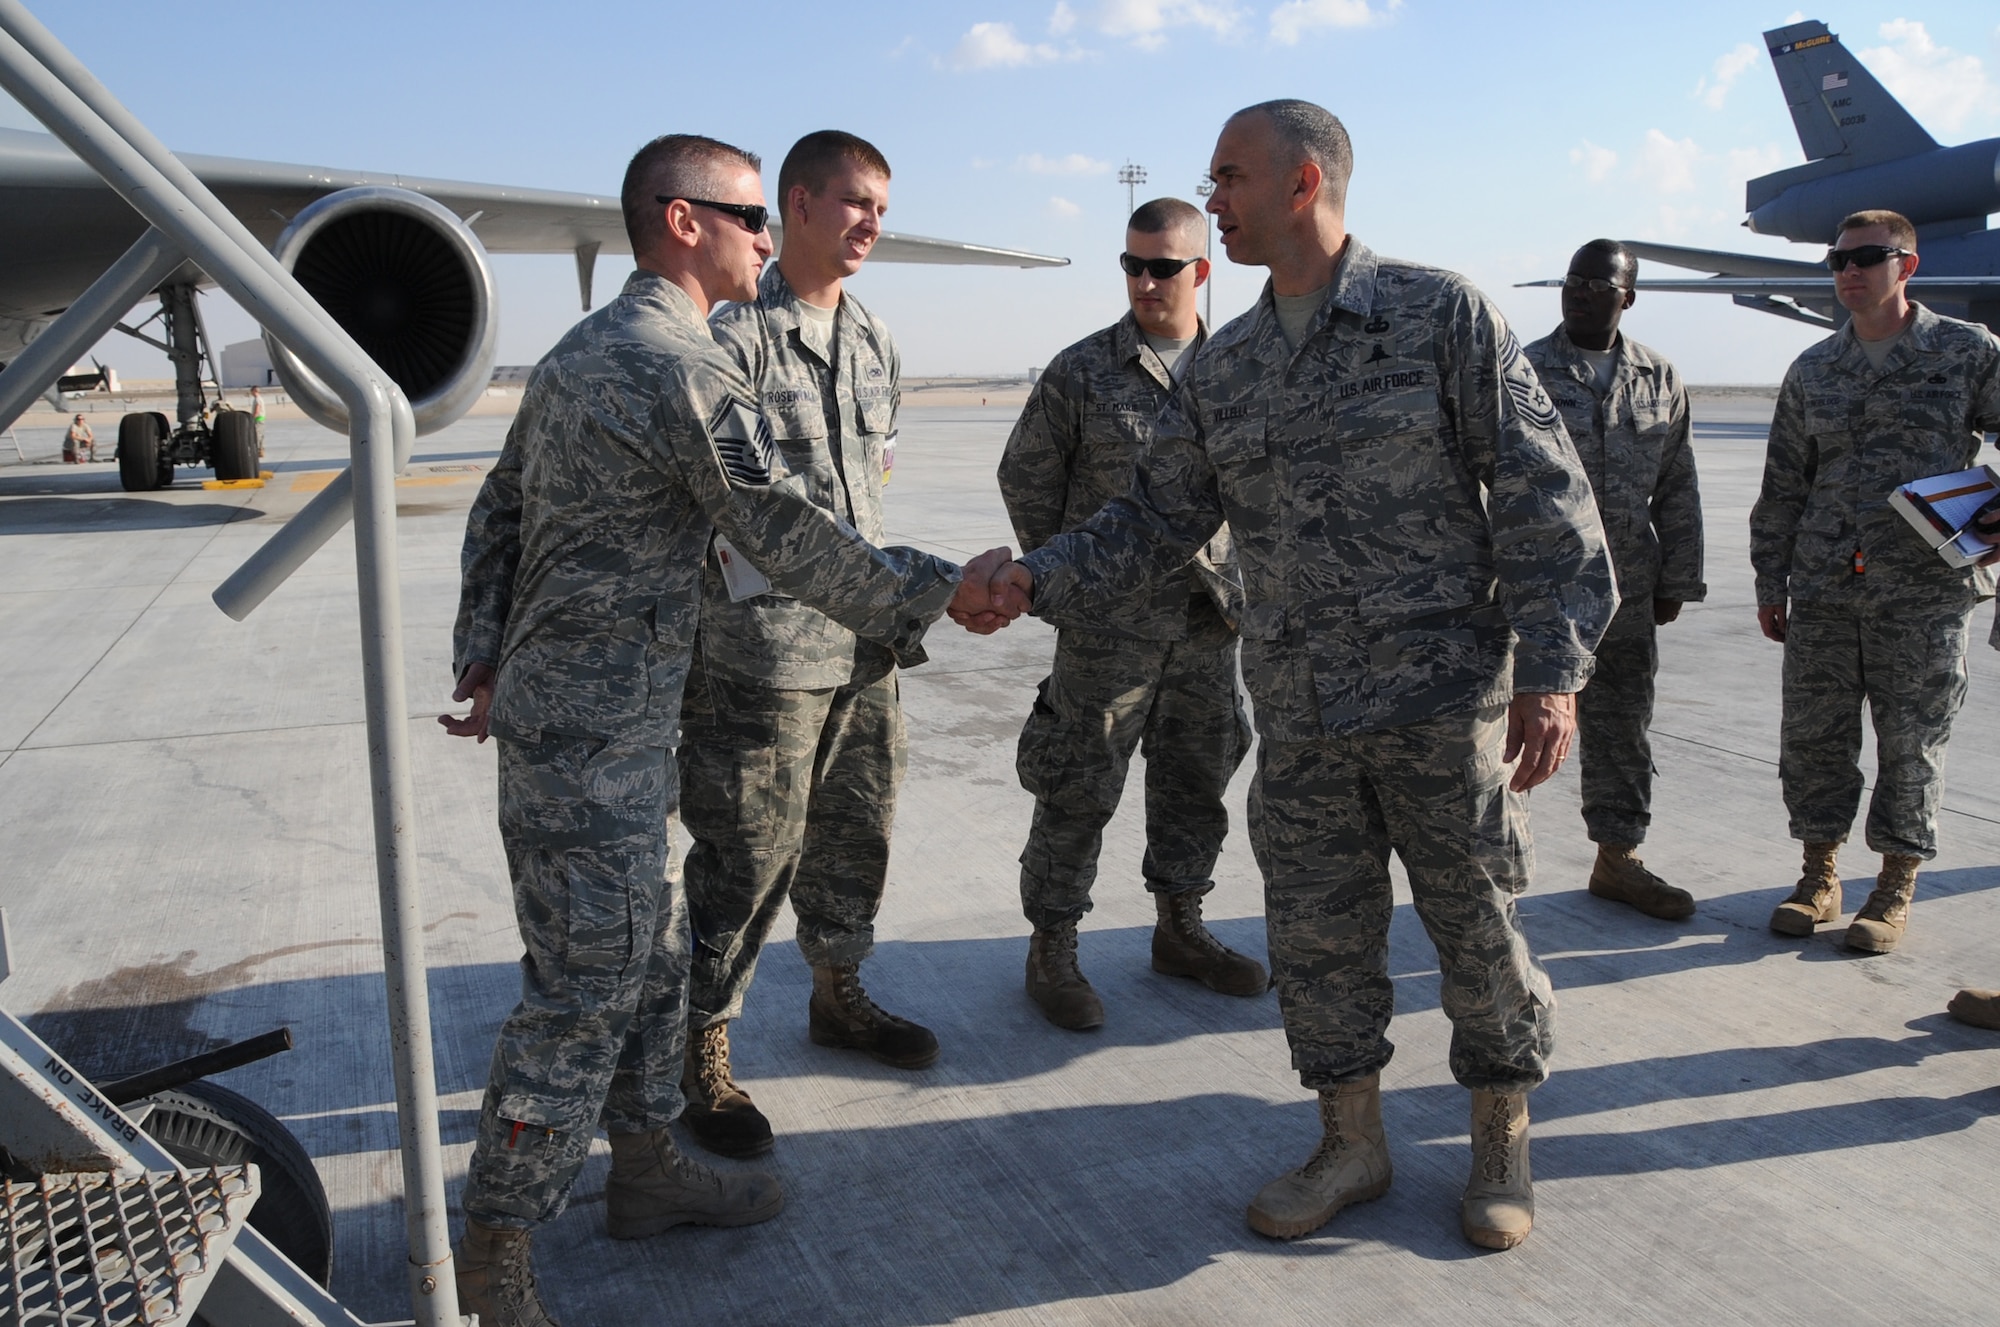 Chief Master Sgt. Mark Villella, command chief master sergeant for Air Forces Central Command, meets with KC-10 Extender maintenance Airmen during his visit to the 380th Air Expeditionary Wing at a non-disclosed base in Southwest Asia on Jan. 6, 2010.  During his visit, Chief Villella learned about the diverse mission of the 380th AEW that includes air refueling, surveillance, and reconnaissance in support of overseas contingency operations in Southwest Asia. The wing supports Operations Iraqi Freedom and Enduring Freedom and the Combined Joint Task Force-Horn of Africa. (U.S. Air Force Photo/Senior Airman Jenifer Calhoun/Released)